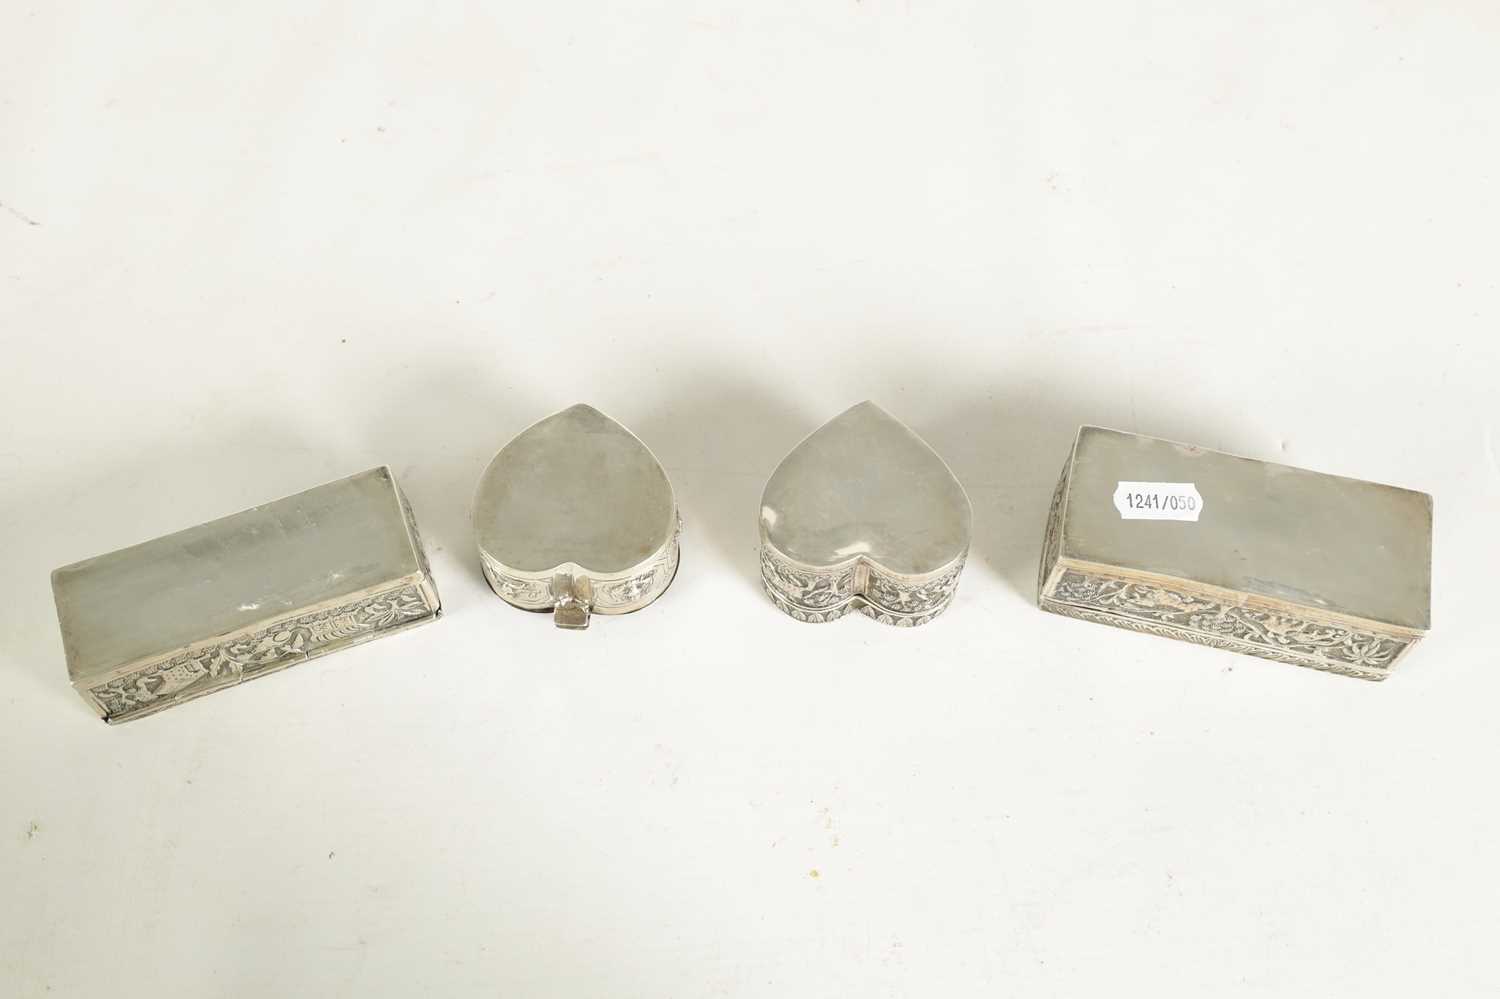 A COLLECTION OF FOUR LATE 19TH CENTURY INDIAN SILVER TRINKET BOXES - Image 14 of 14